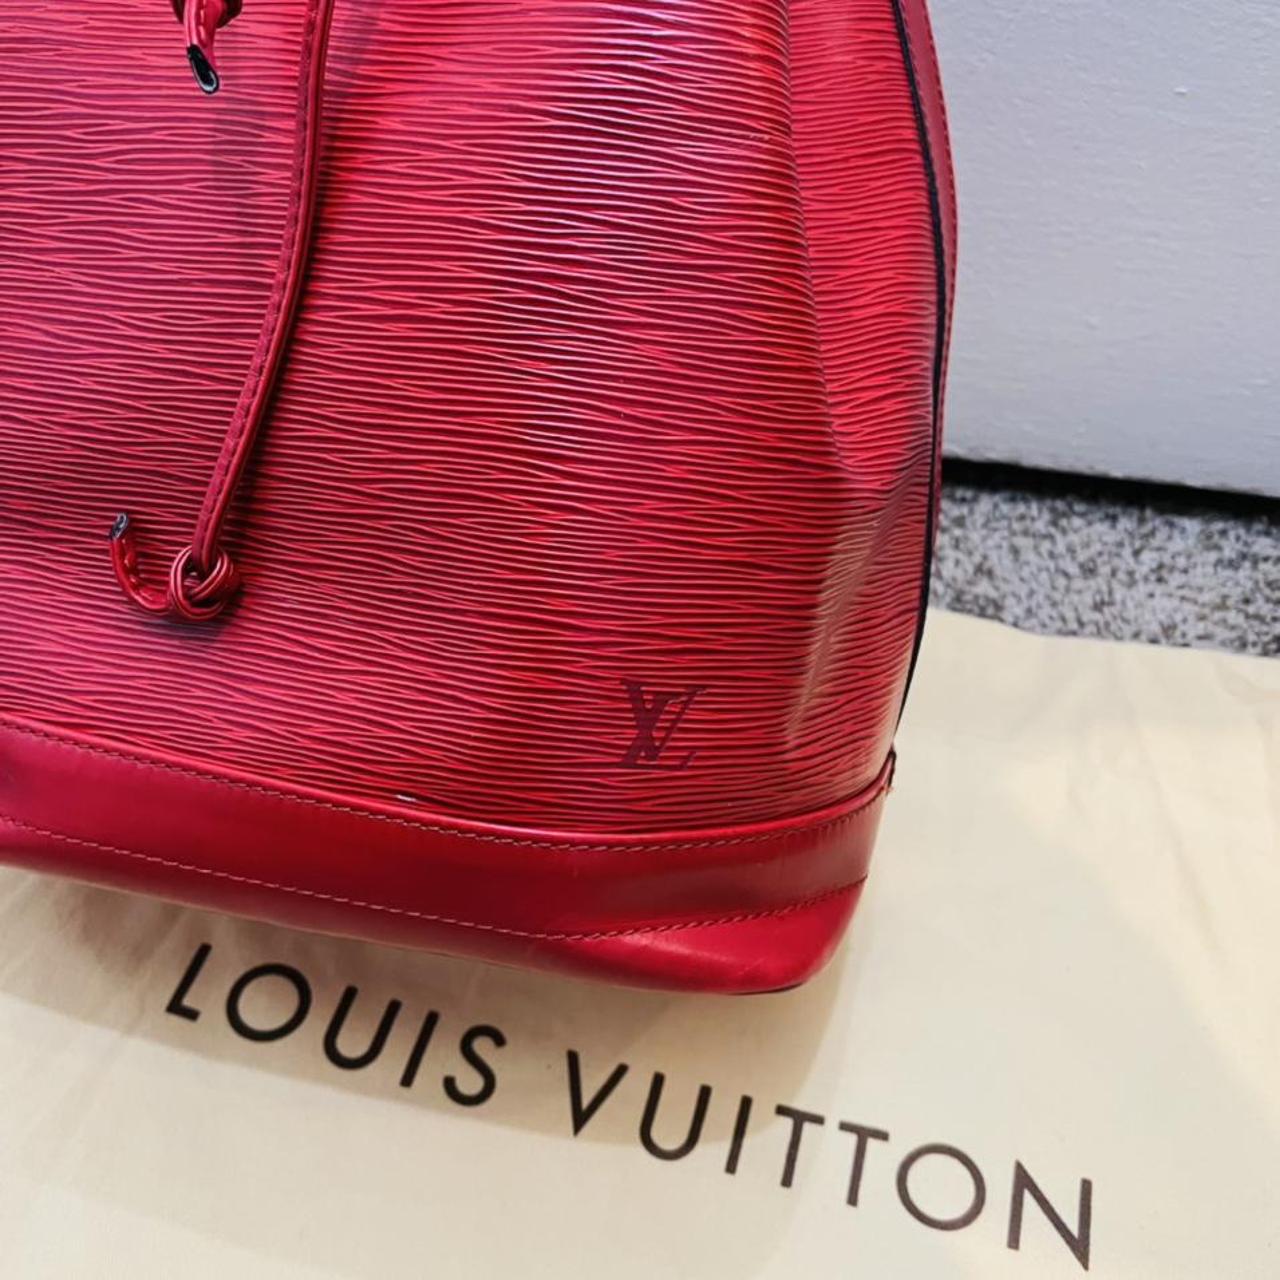 Louis Vuitton Red Bag is absolutely in excellent - Depop